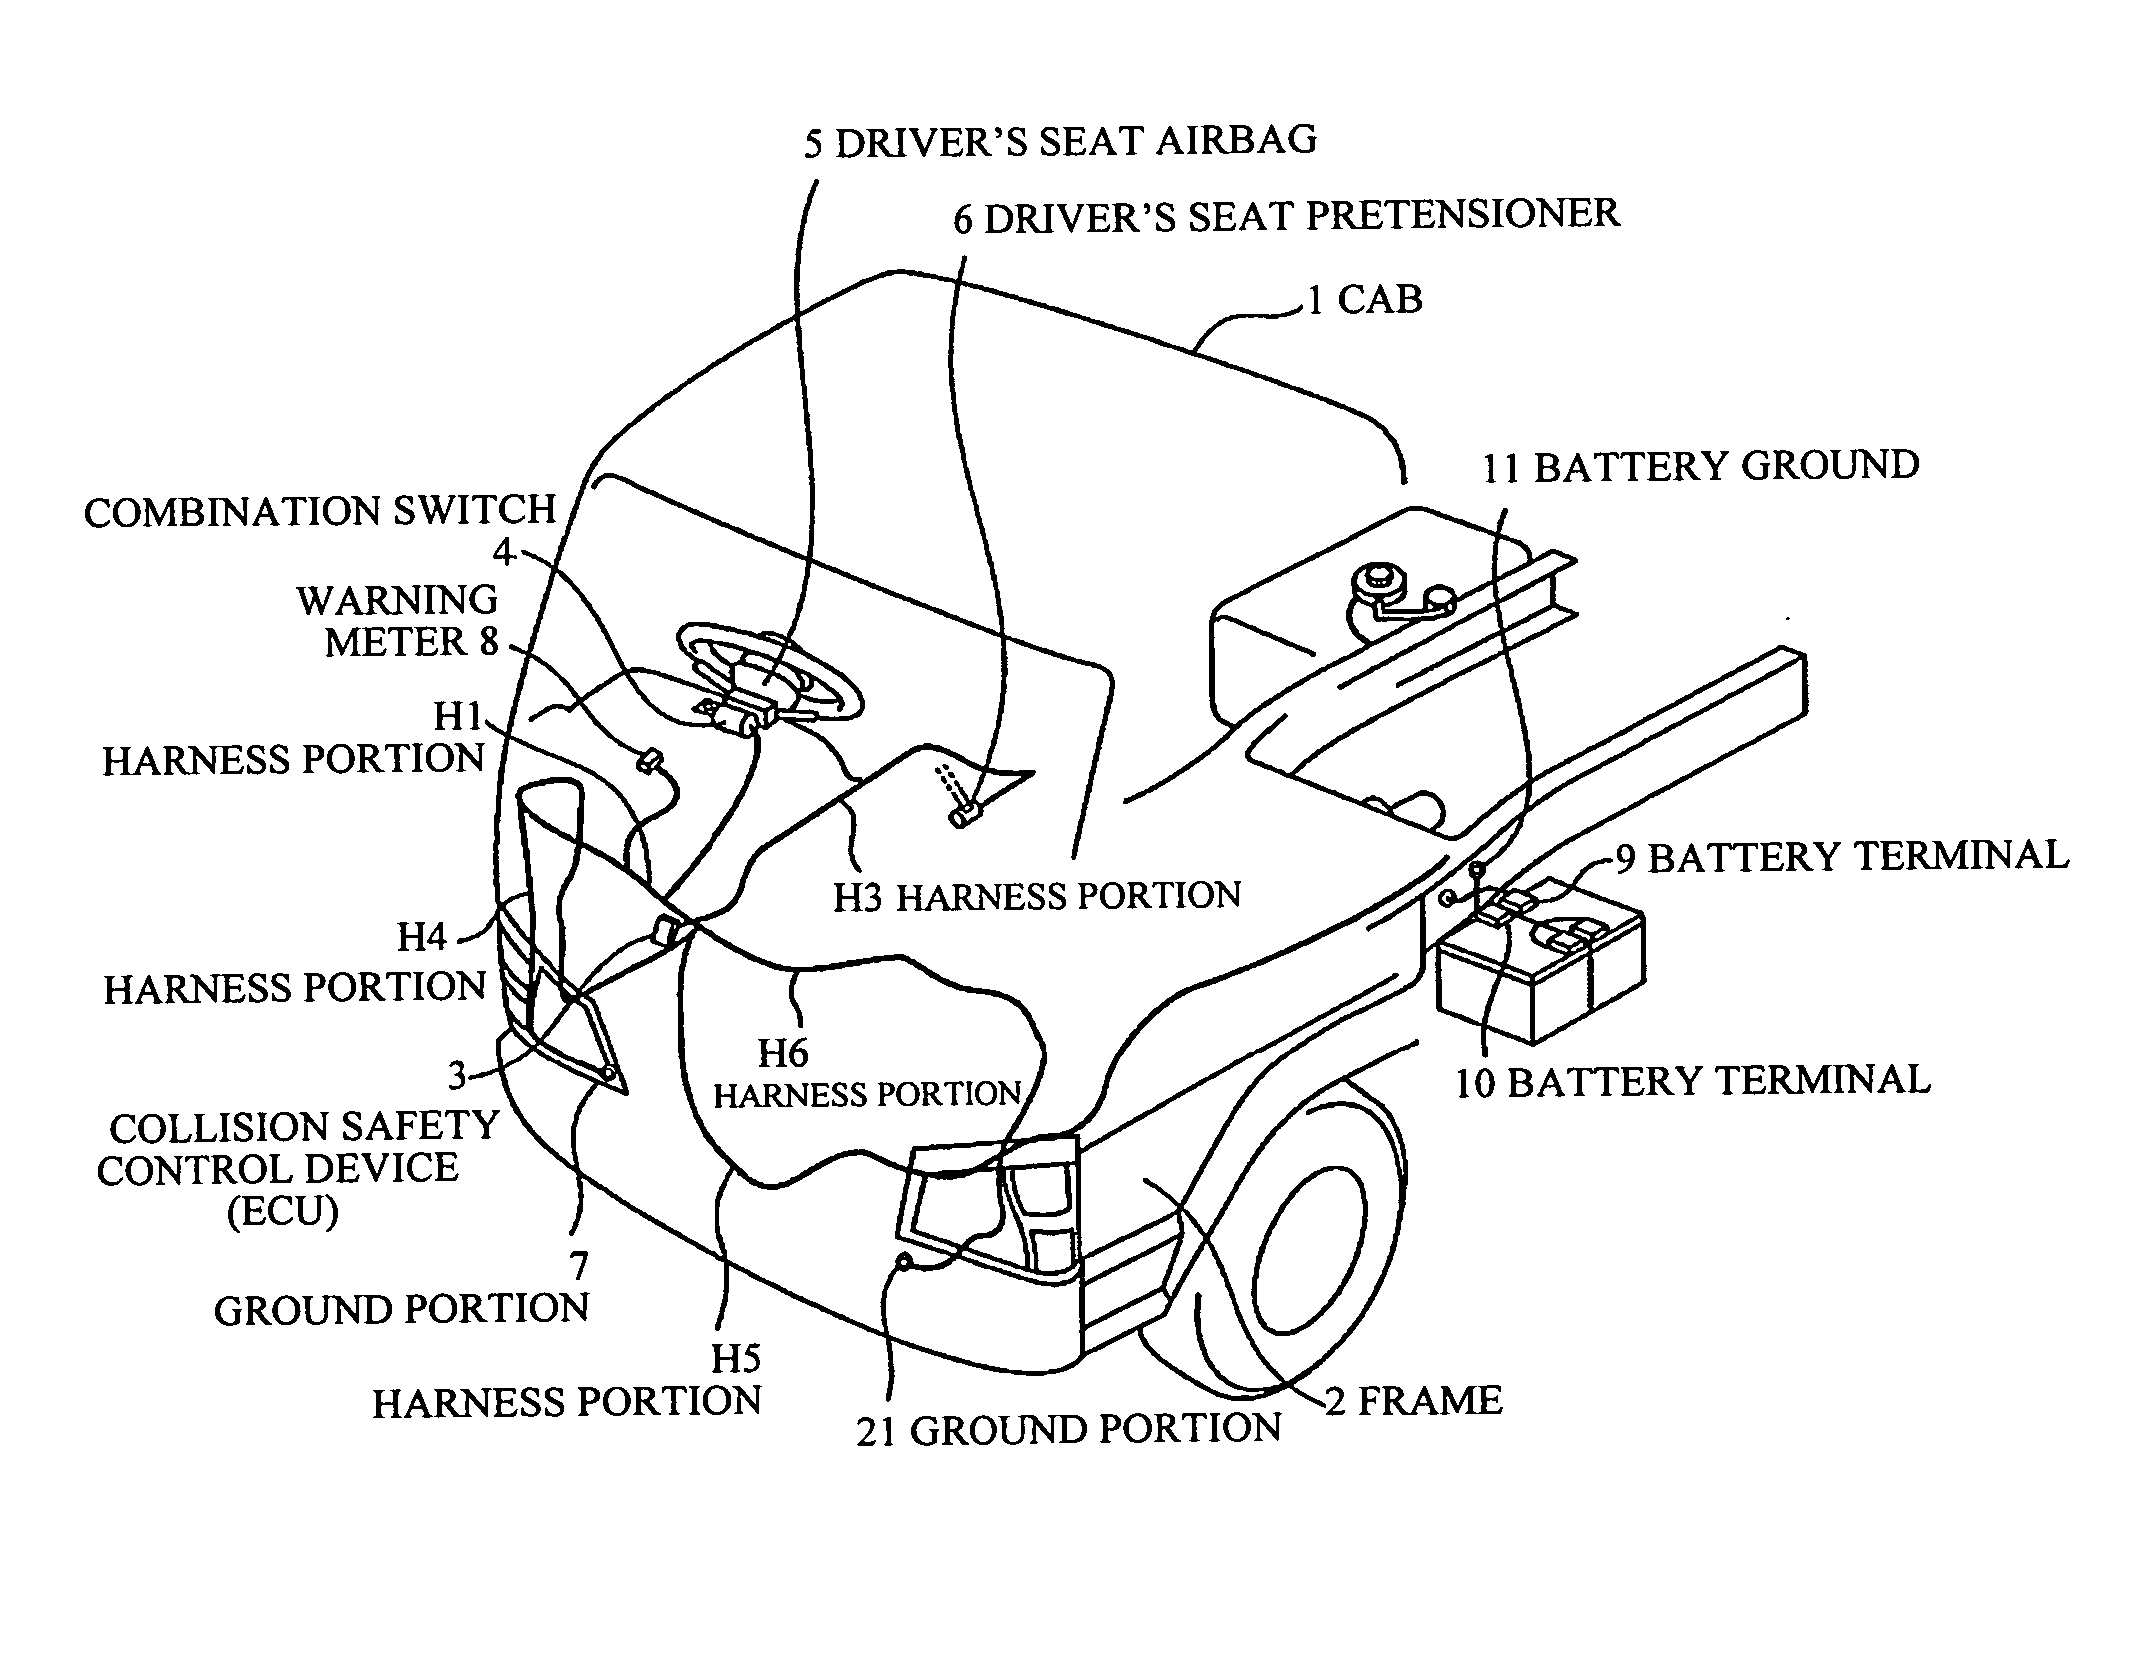 Collision safety control device